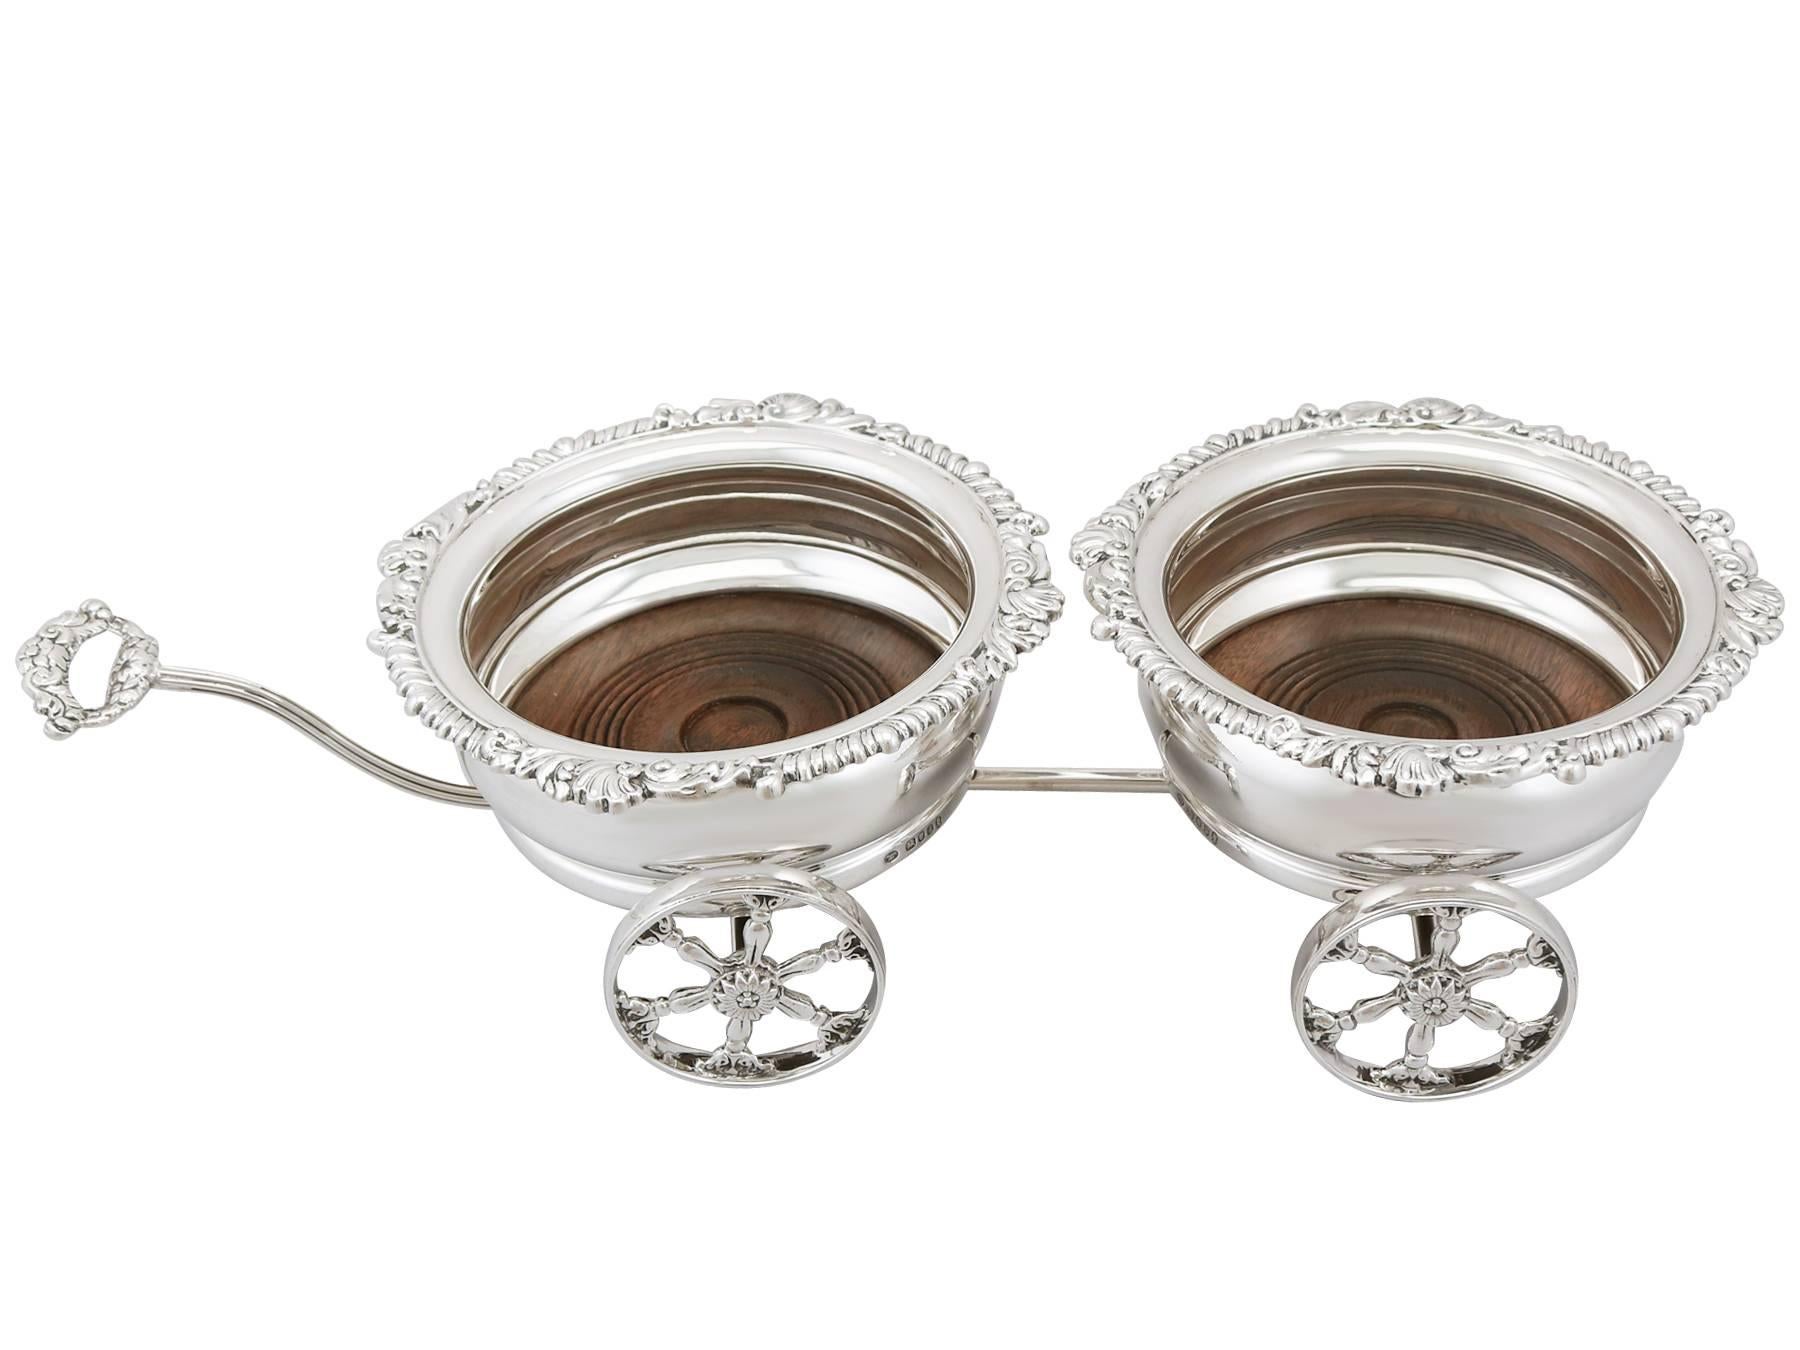 An exceptional, fine and impressive pair of vintage English sterling silver carriage coasters; an addition to our range of collectable silverware.

These exceptional vintage sterling silver carriage coasters have a circular rounded shaped